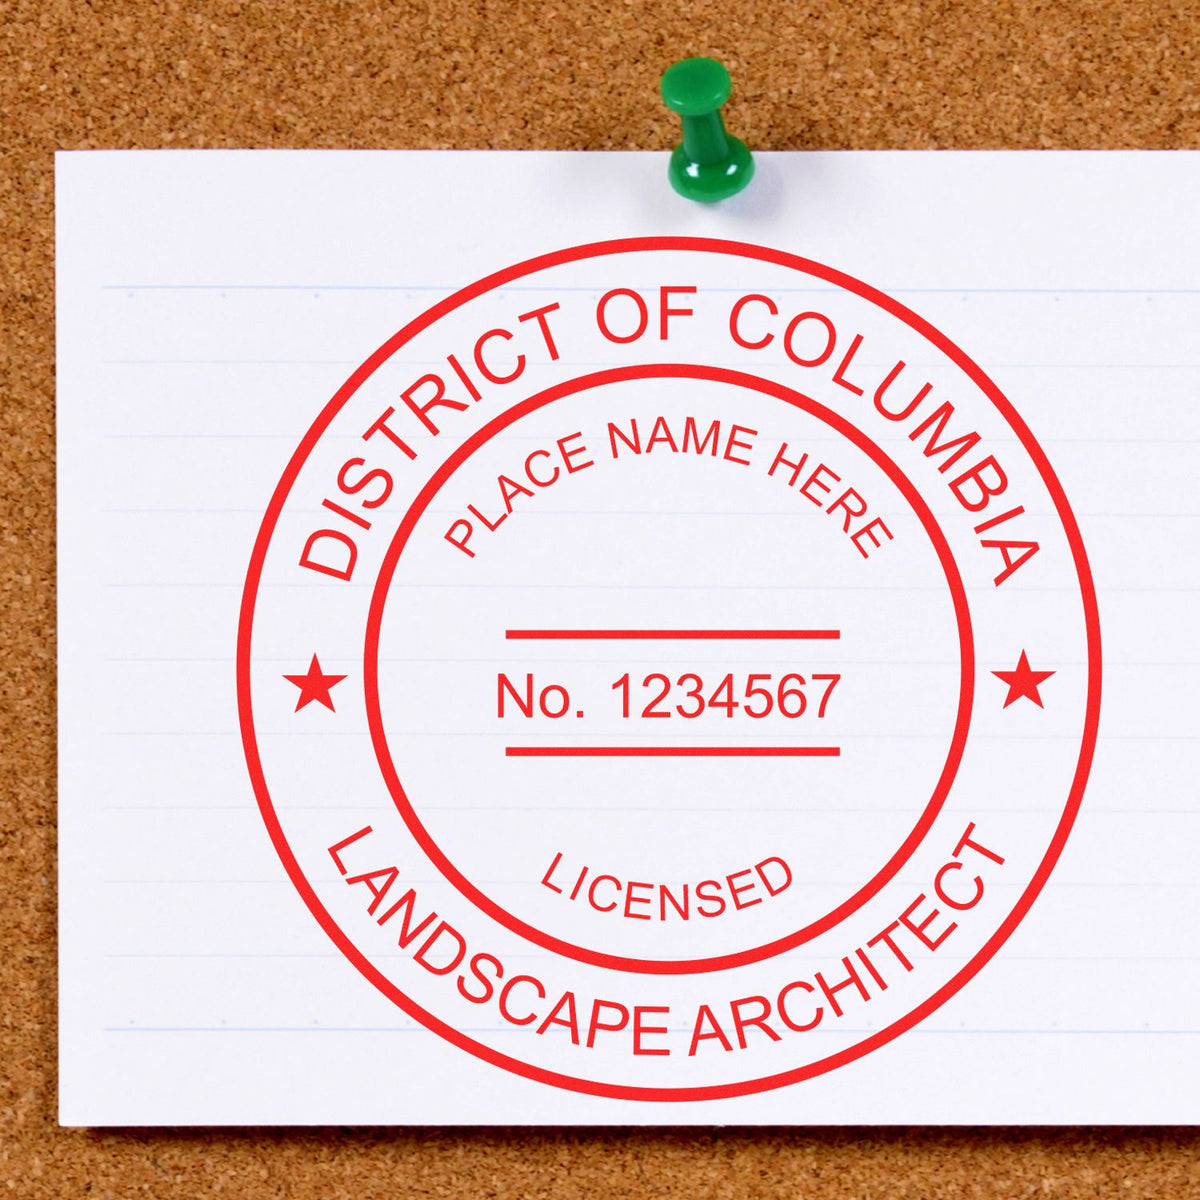 The District of Columbia Landscape Architectural Seal Stamp stamp impression comes to life with a crisp, detailed photo on paper - showcasing true professional quality.